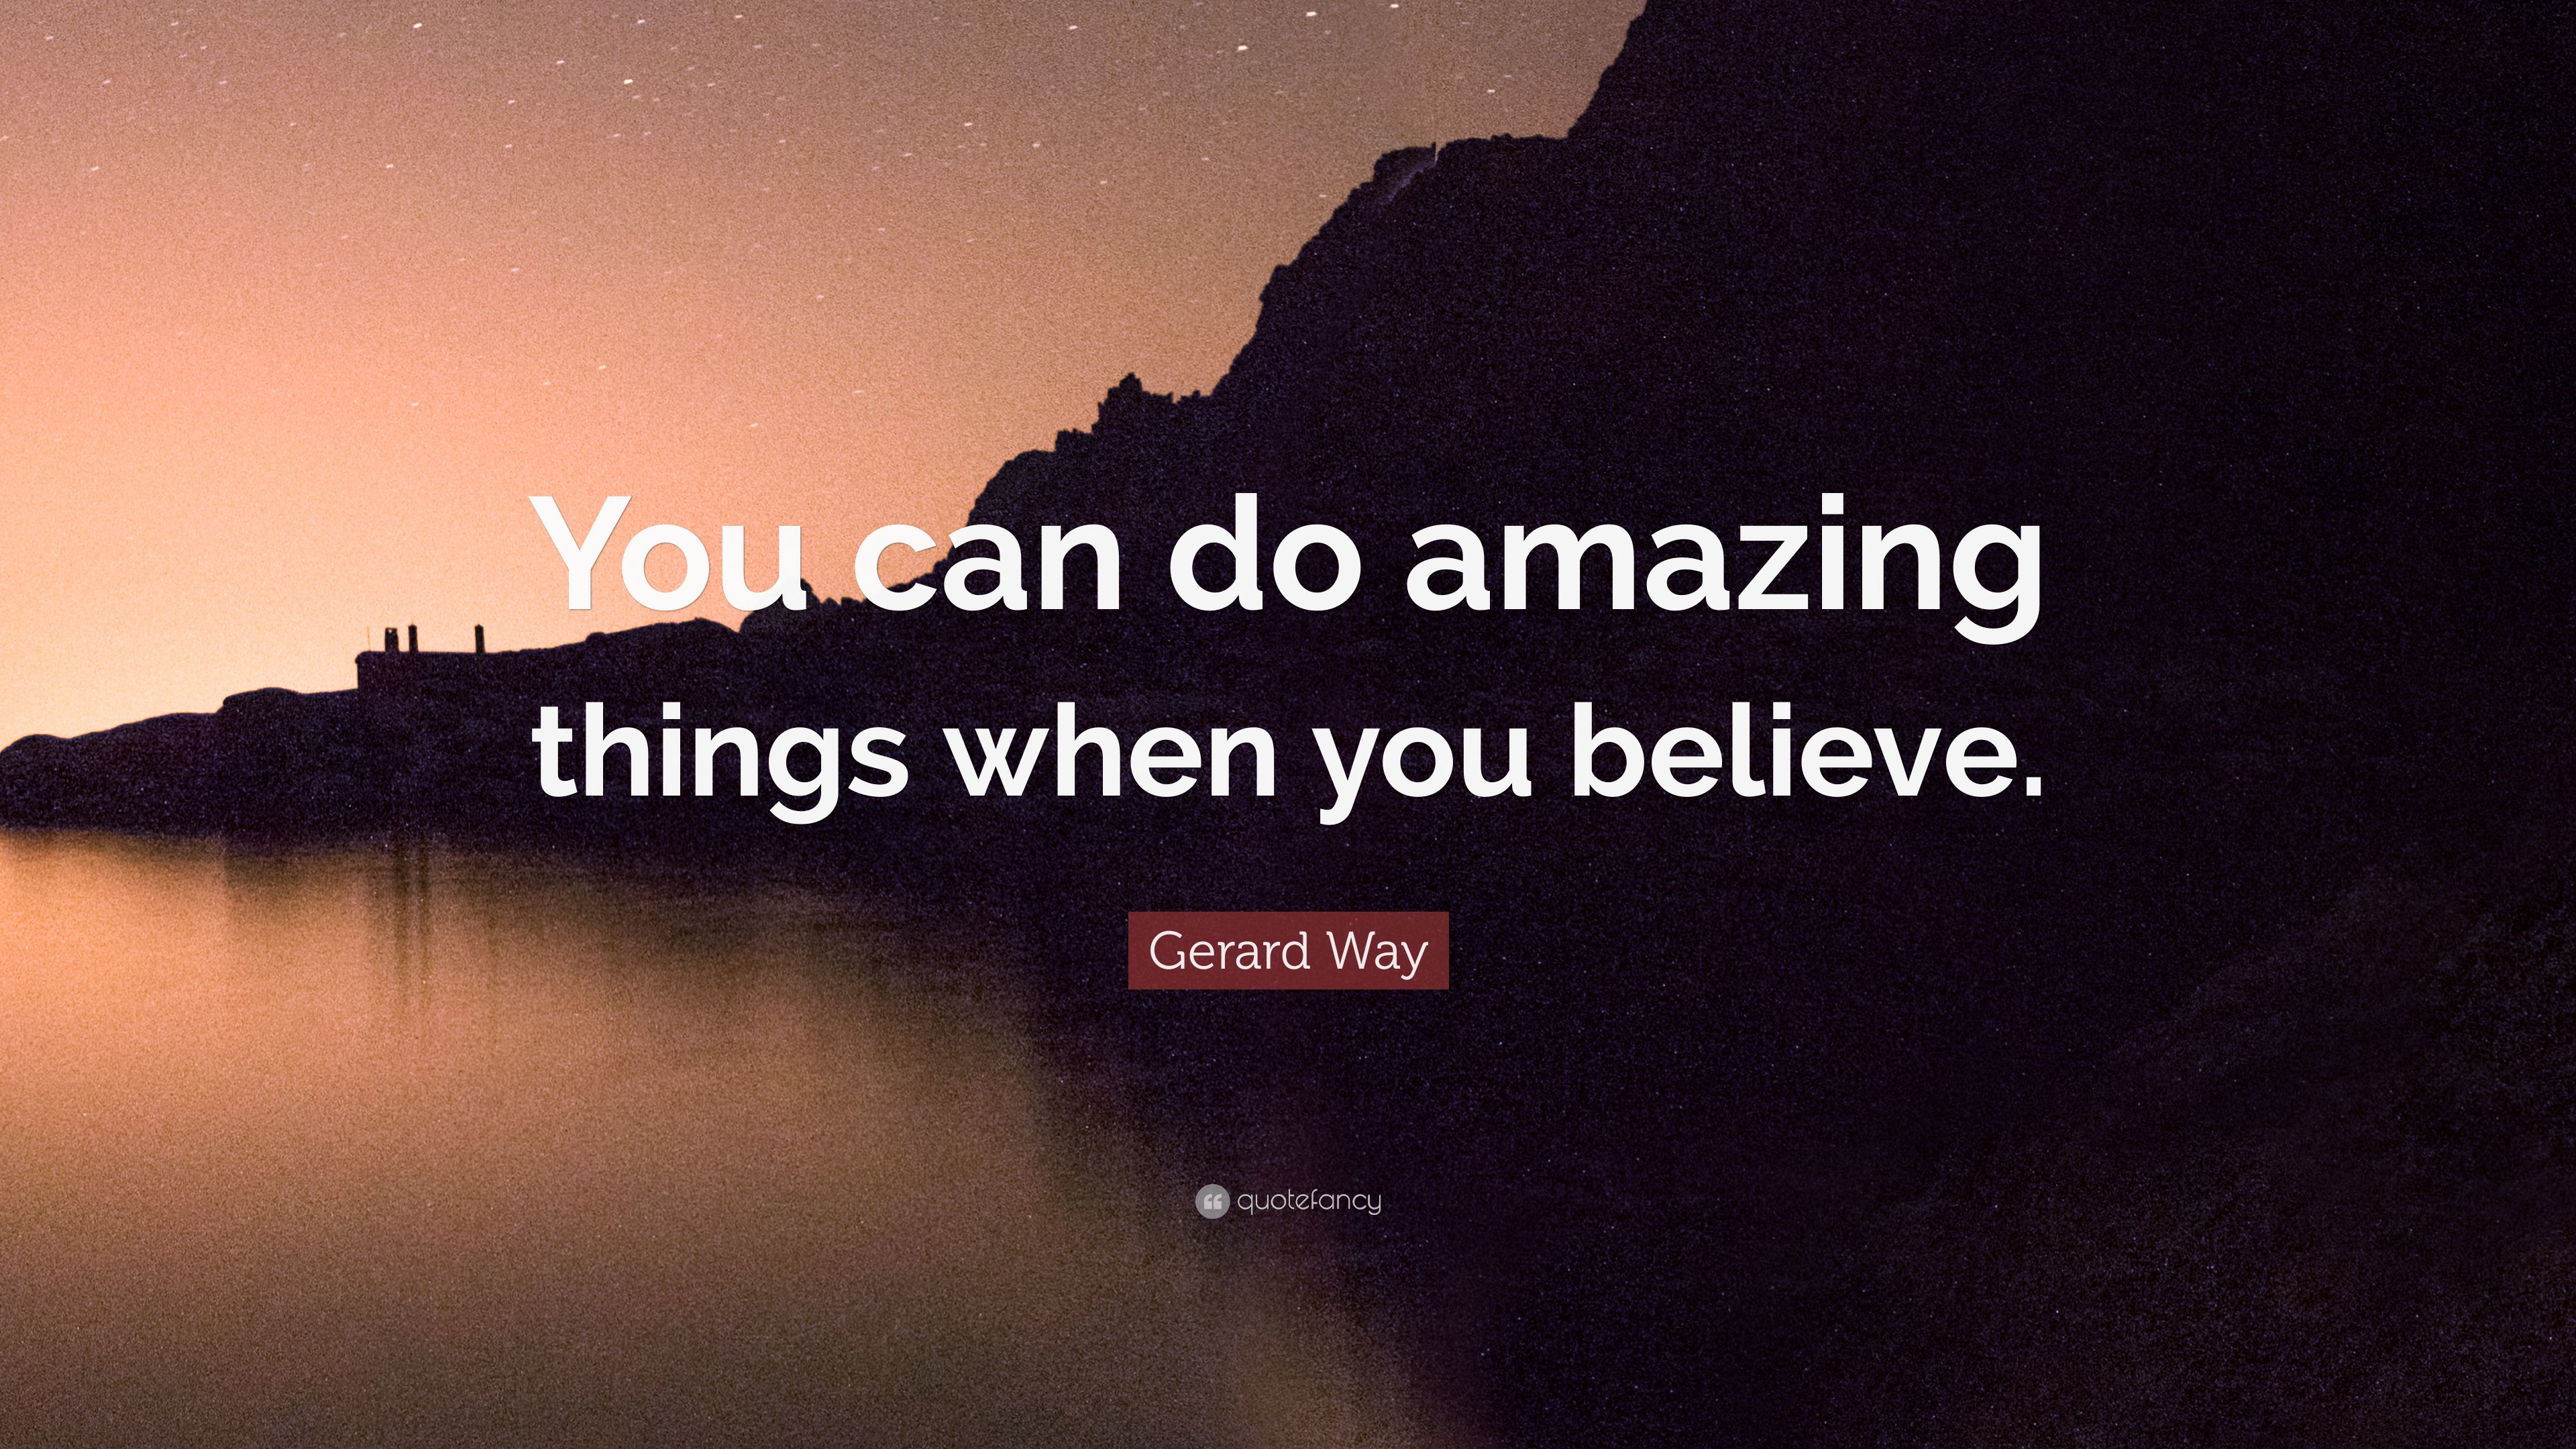 Gerard Way Quote: “You can do amazing things when you believe.” (9 wallpaper)